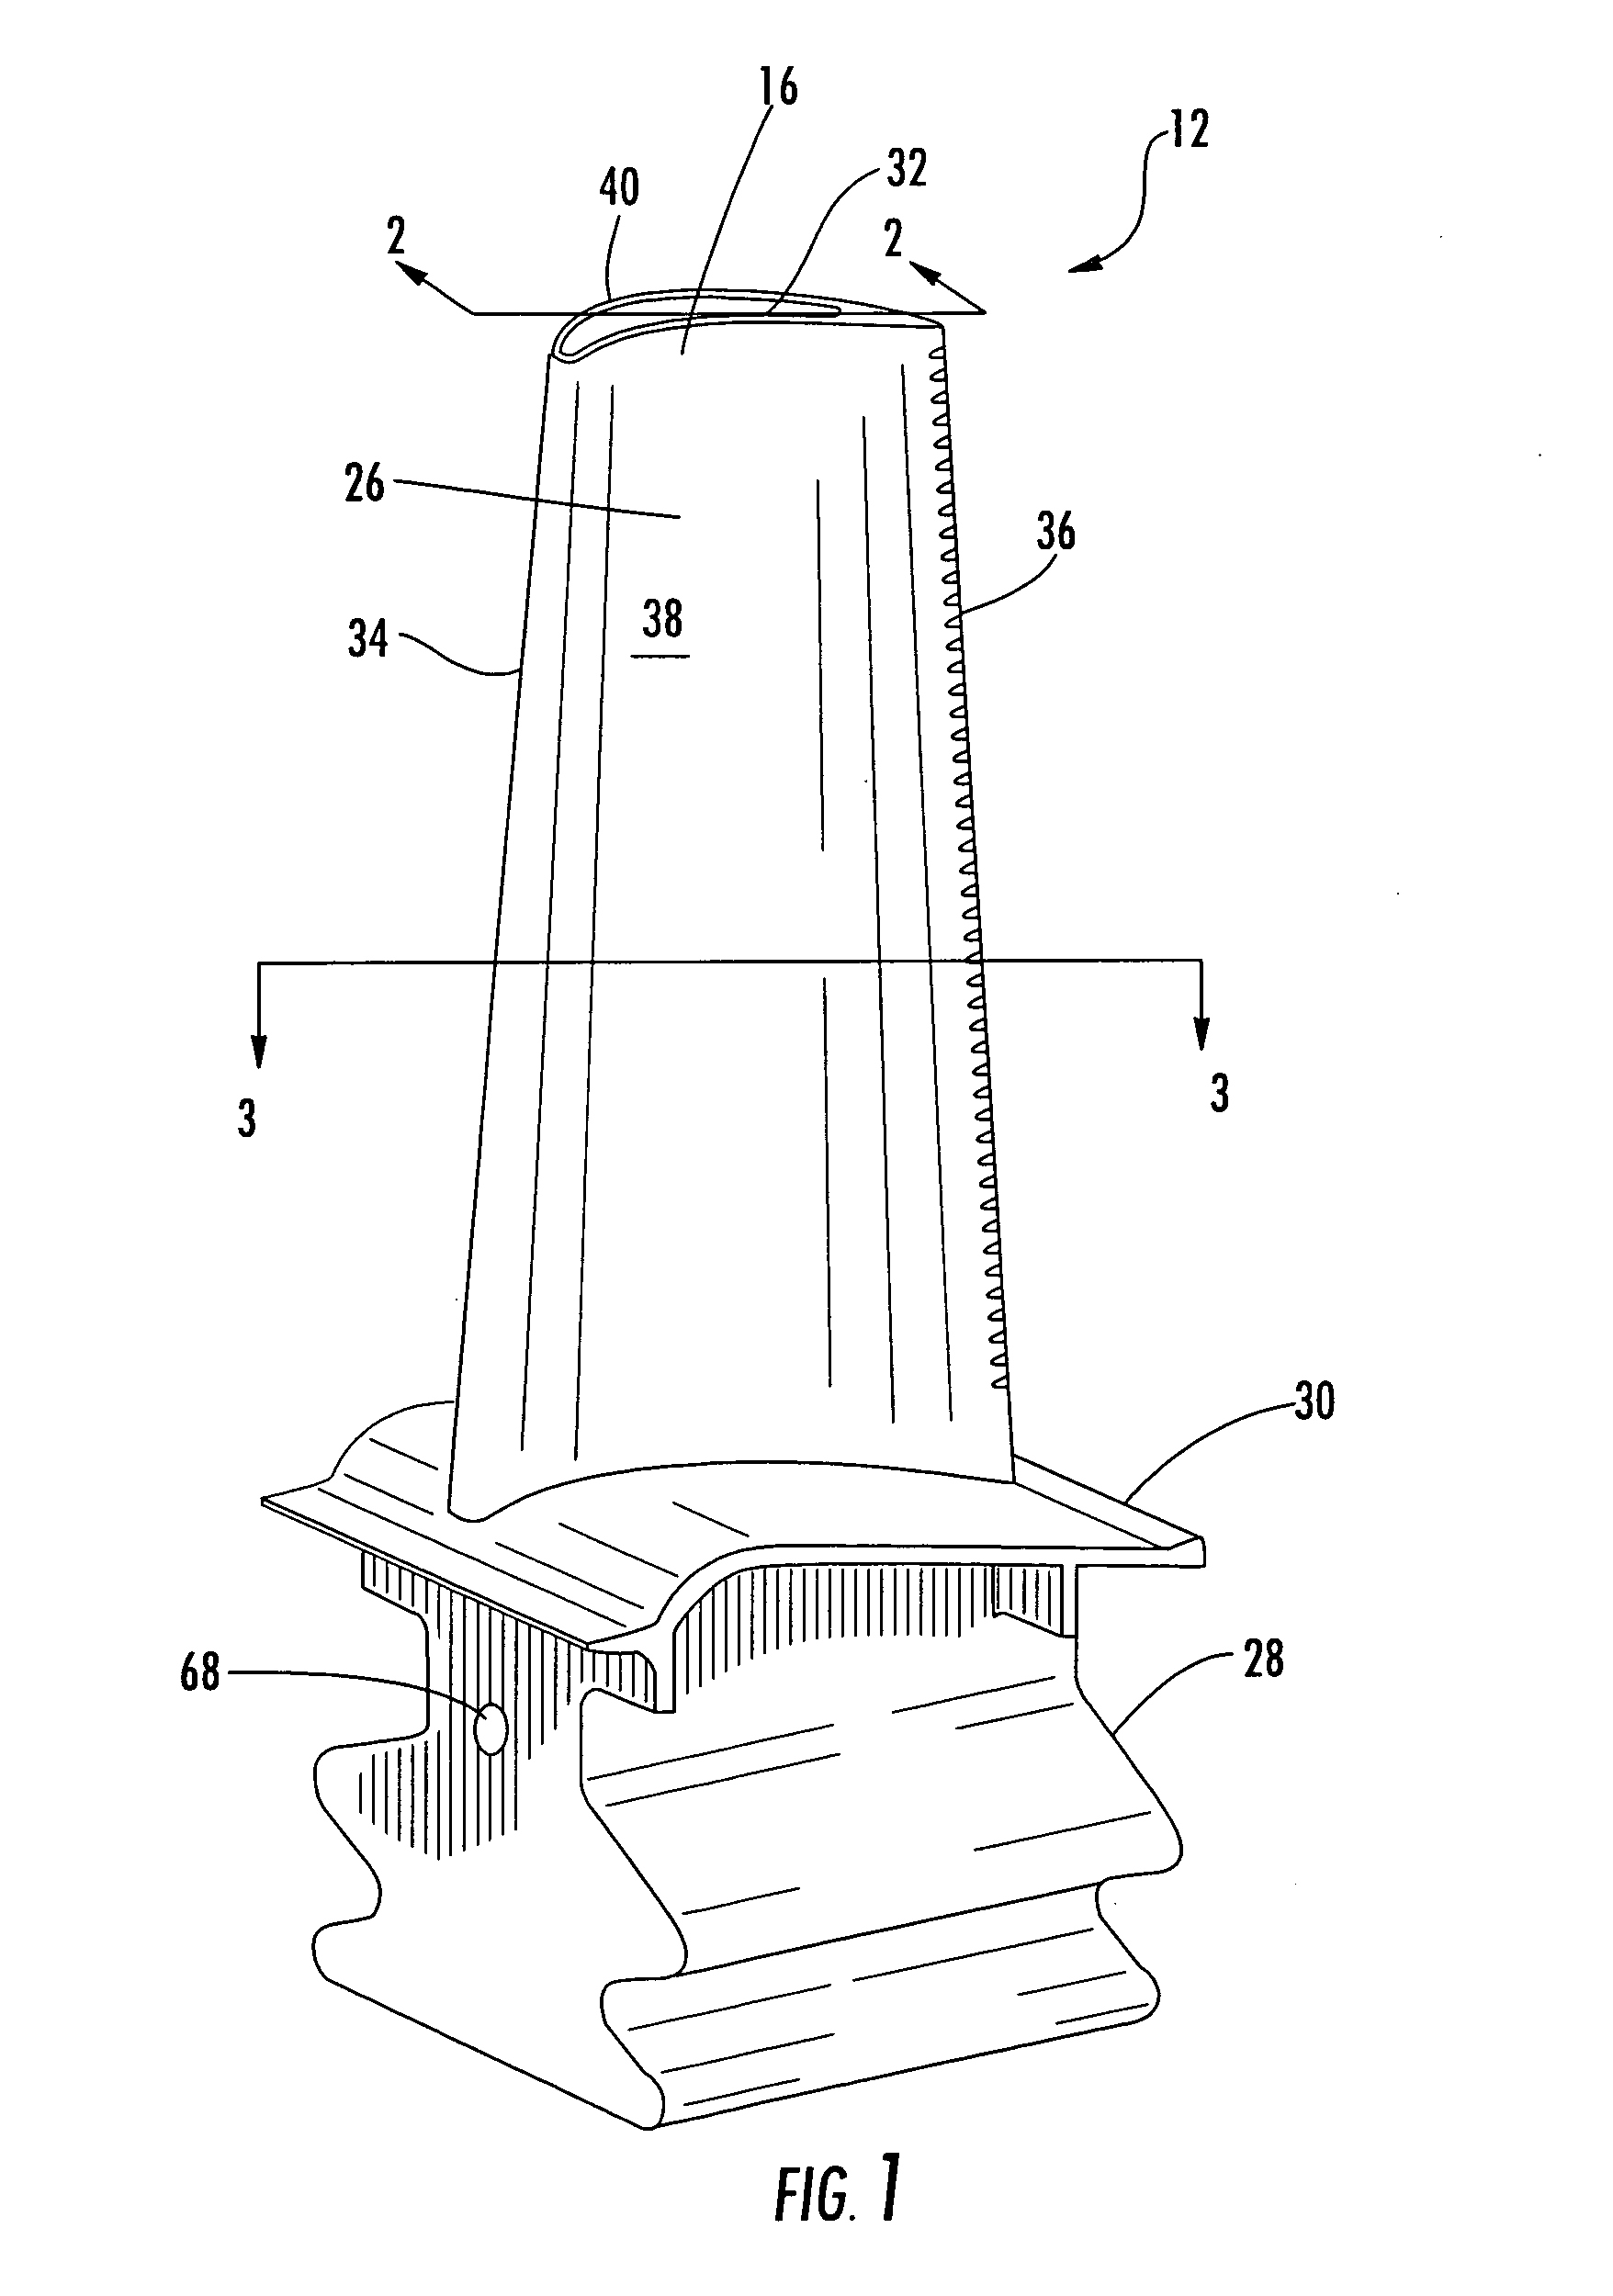 Turbine airfoil cooling system with perimeter cooling and rim cavity purge channels